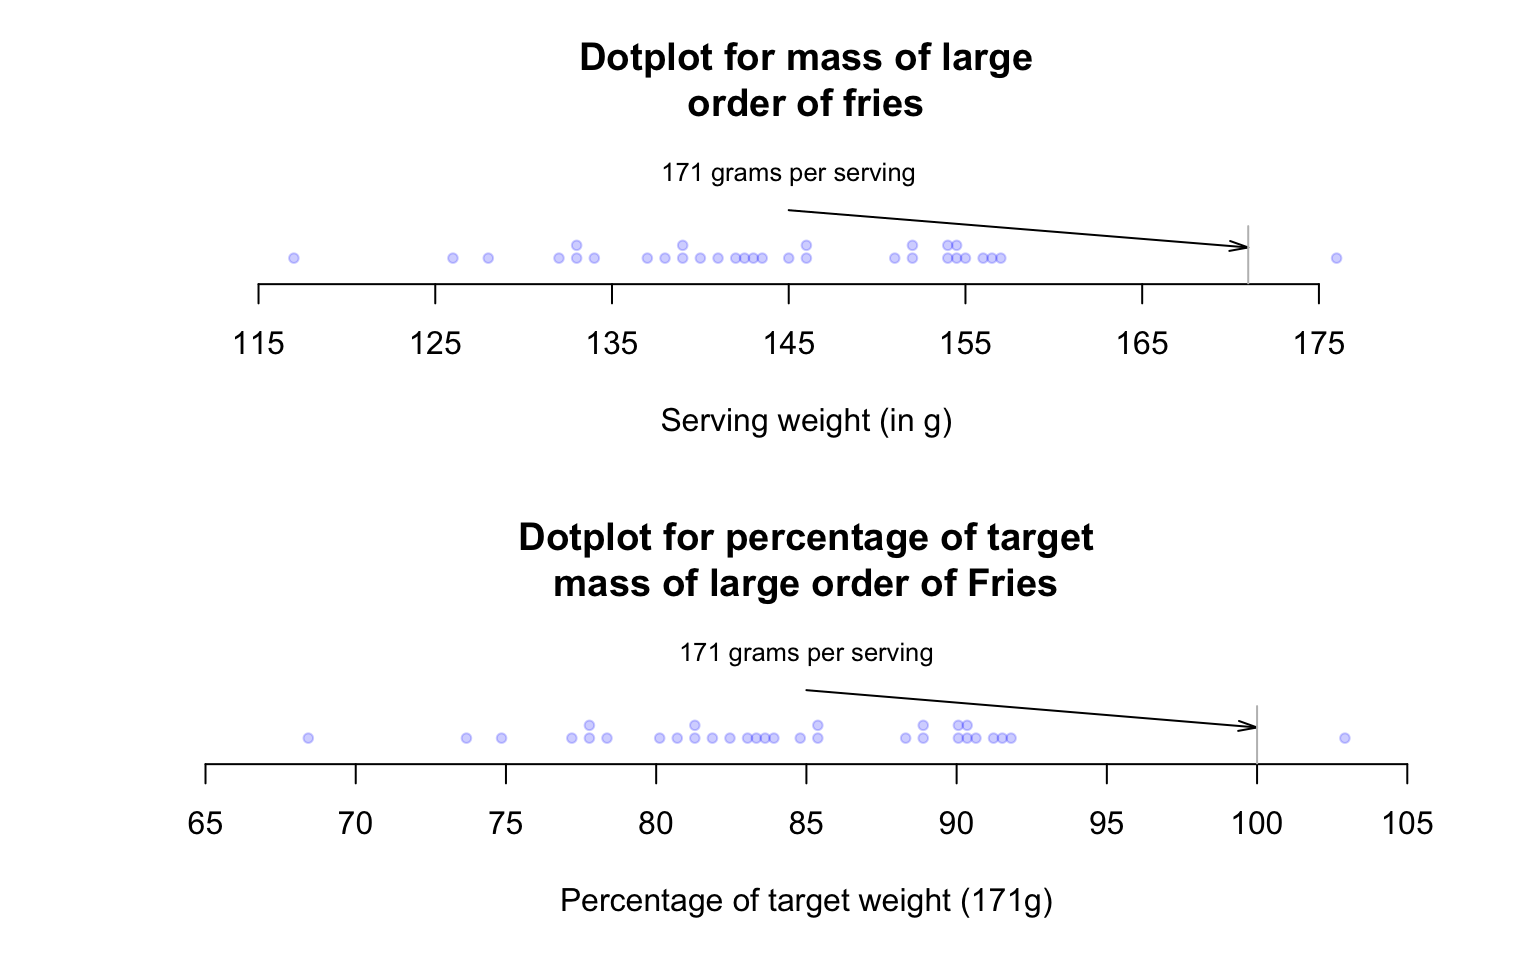 Large orders of French fries: Mass measurements (top panel) and percentage of target mass (below panel)